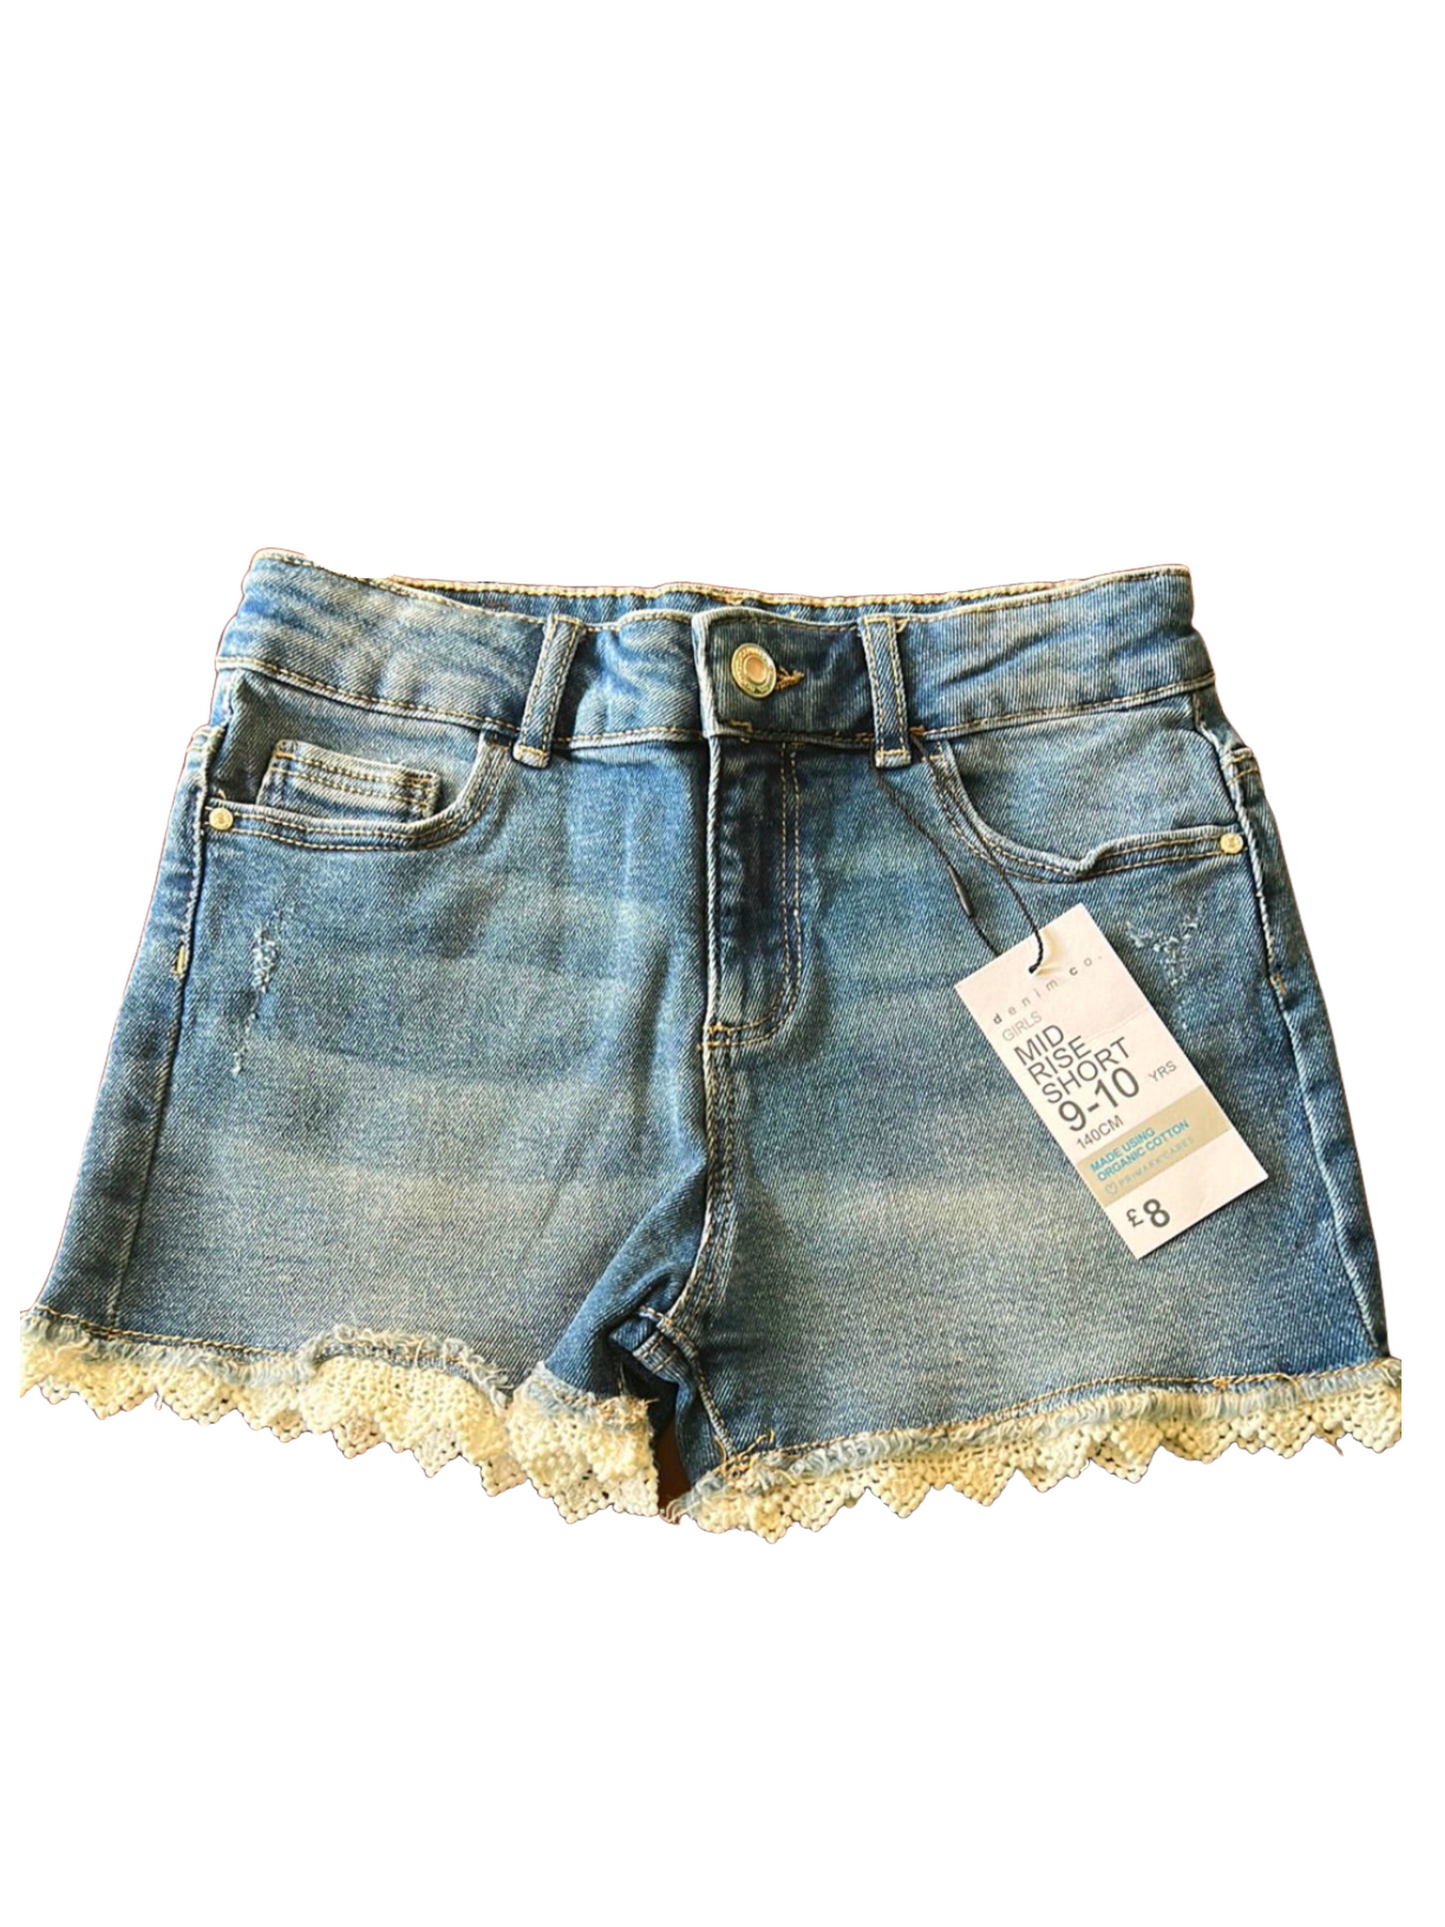 Primark new with tags denim shirts w/ lace frill age 9-10